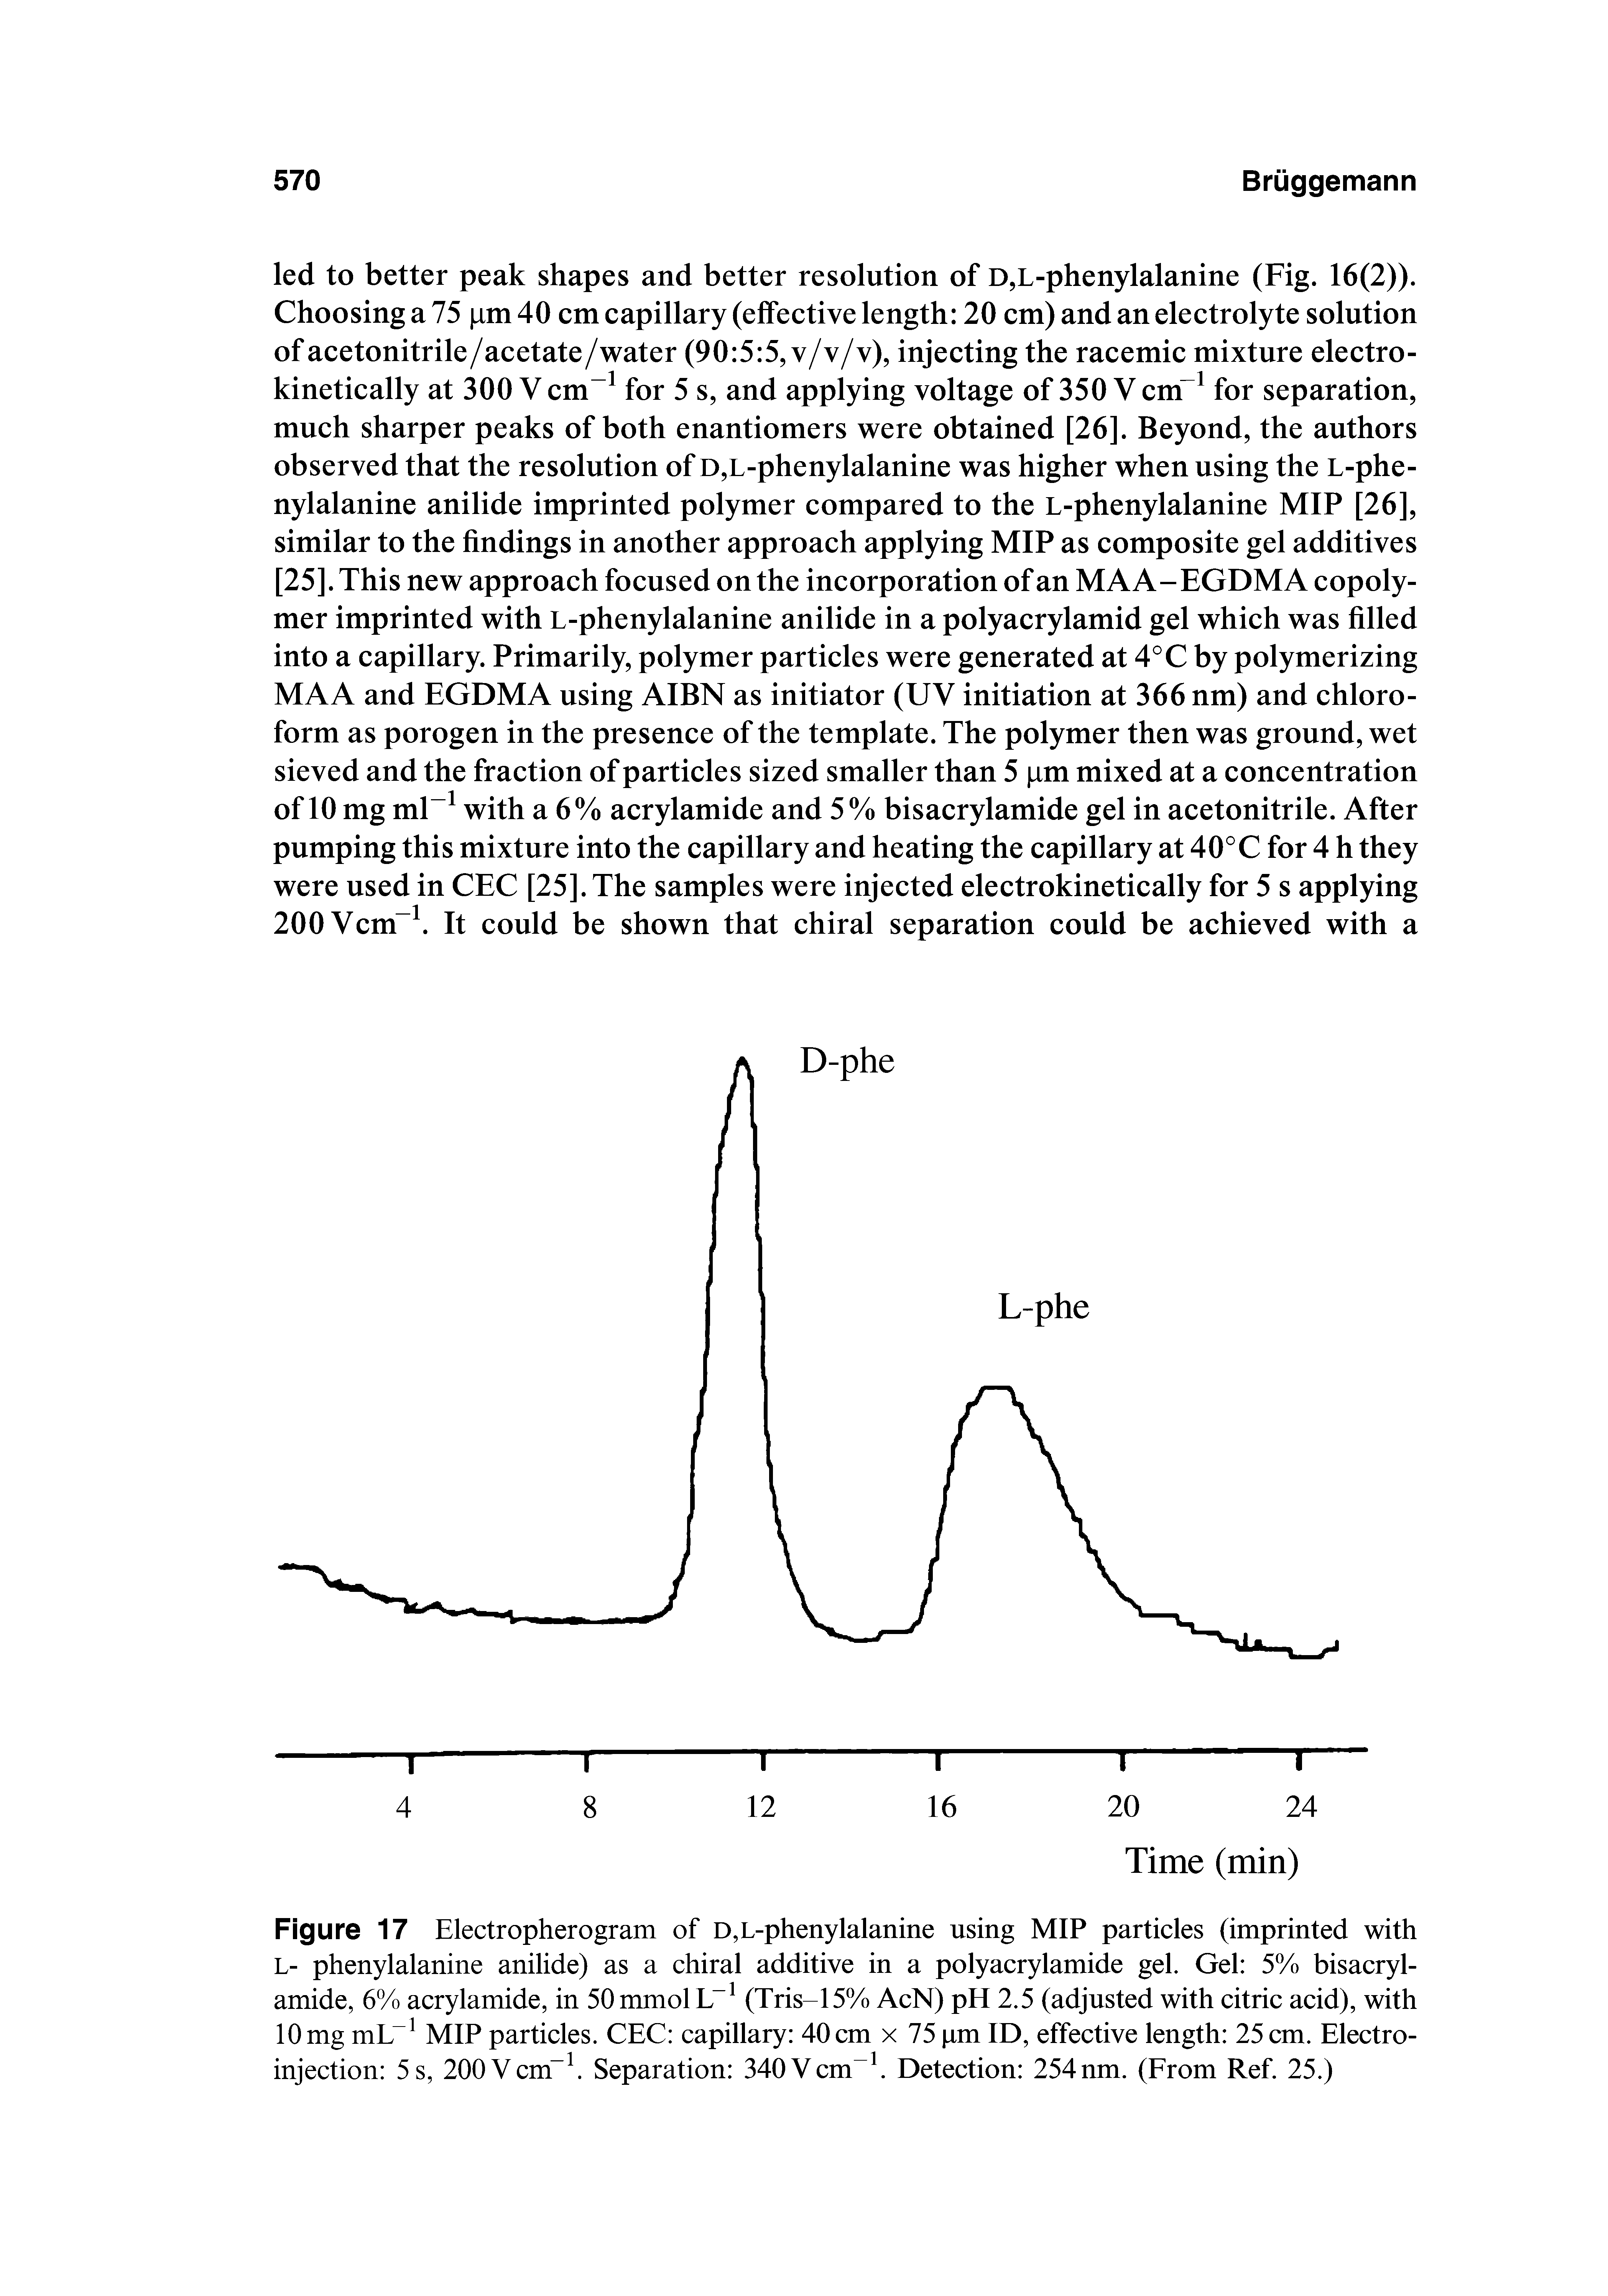 Figure 17 Electropherogram of D,L-phenylalanine using MIP particles (imprinted with L- phenylalanine anilide) as a chiral additive in a polyacrylamide gel Gel 5% bisacrylamide, 6% acrylamide, in 50 mmol (Tris-15% AcN) pH 2.5 (adjusted with citric acid), with 10 mg mL MIP particles. CEC capillary 40 cm x 75 pm ID, effective length 25 cm. Electroinjection 5 s, 200Vcm Separation 340Vcm Detection 254 nm. (From Ref. 25.)...